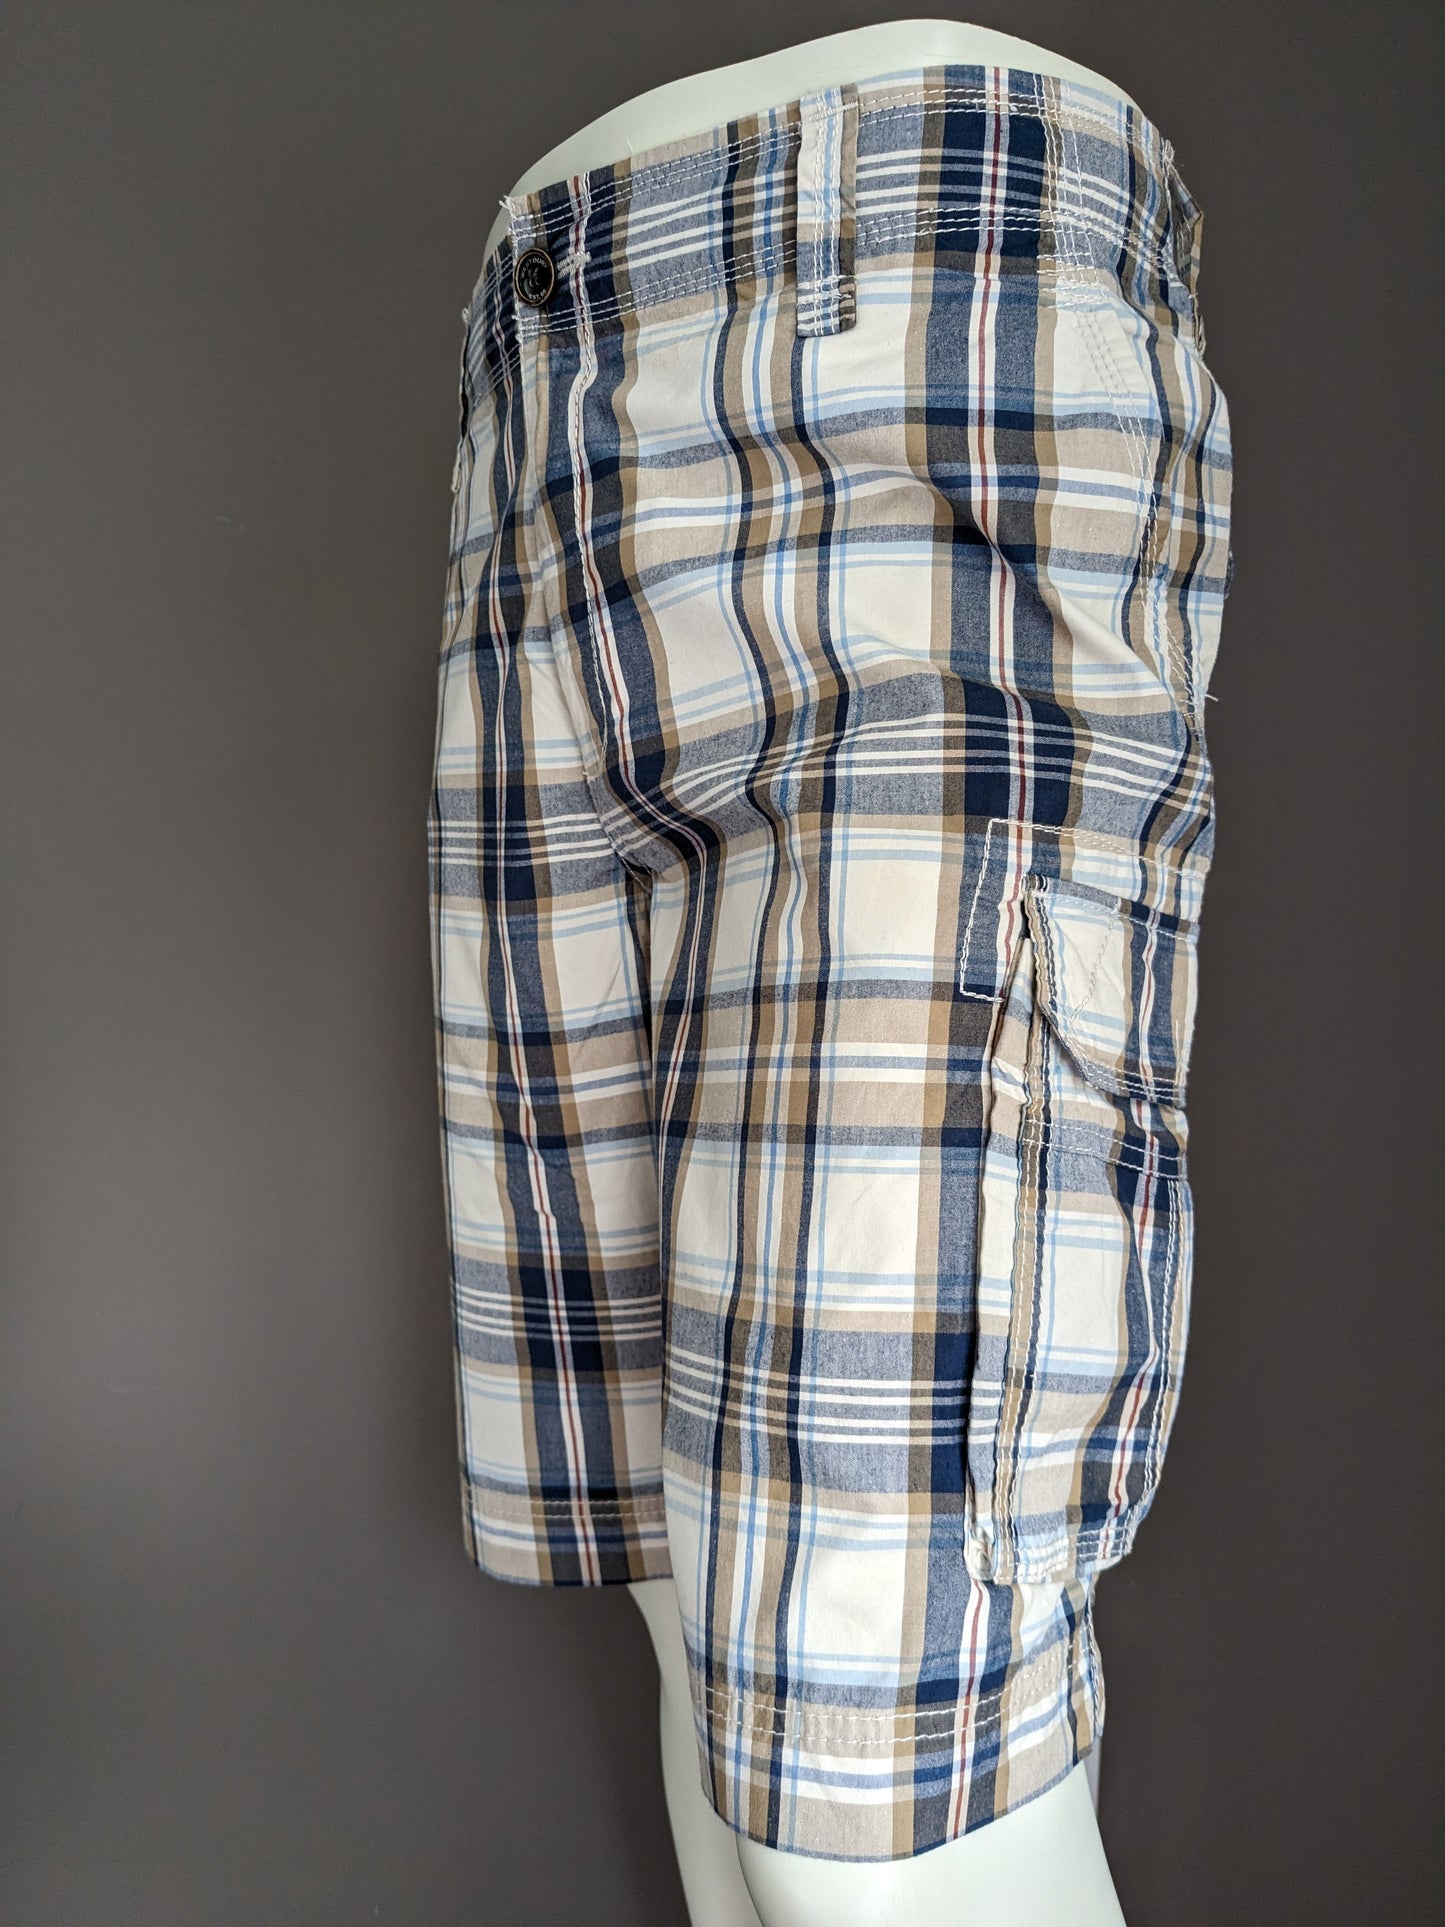 Westbury shorts with bags. Brown beige blue checked. Size 58 / XL.